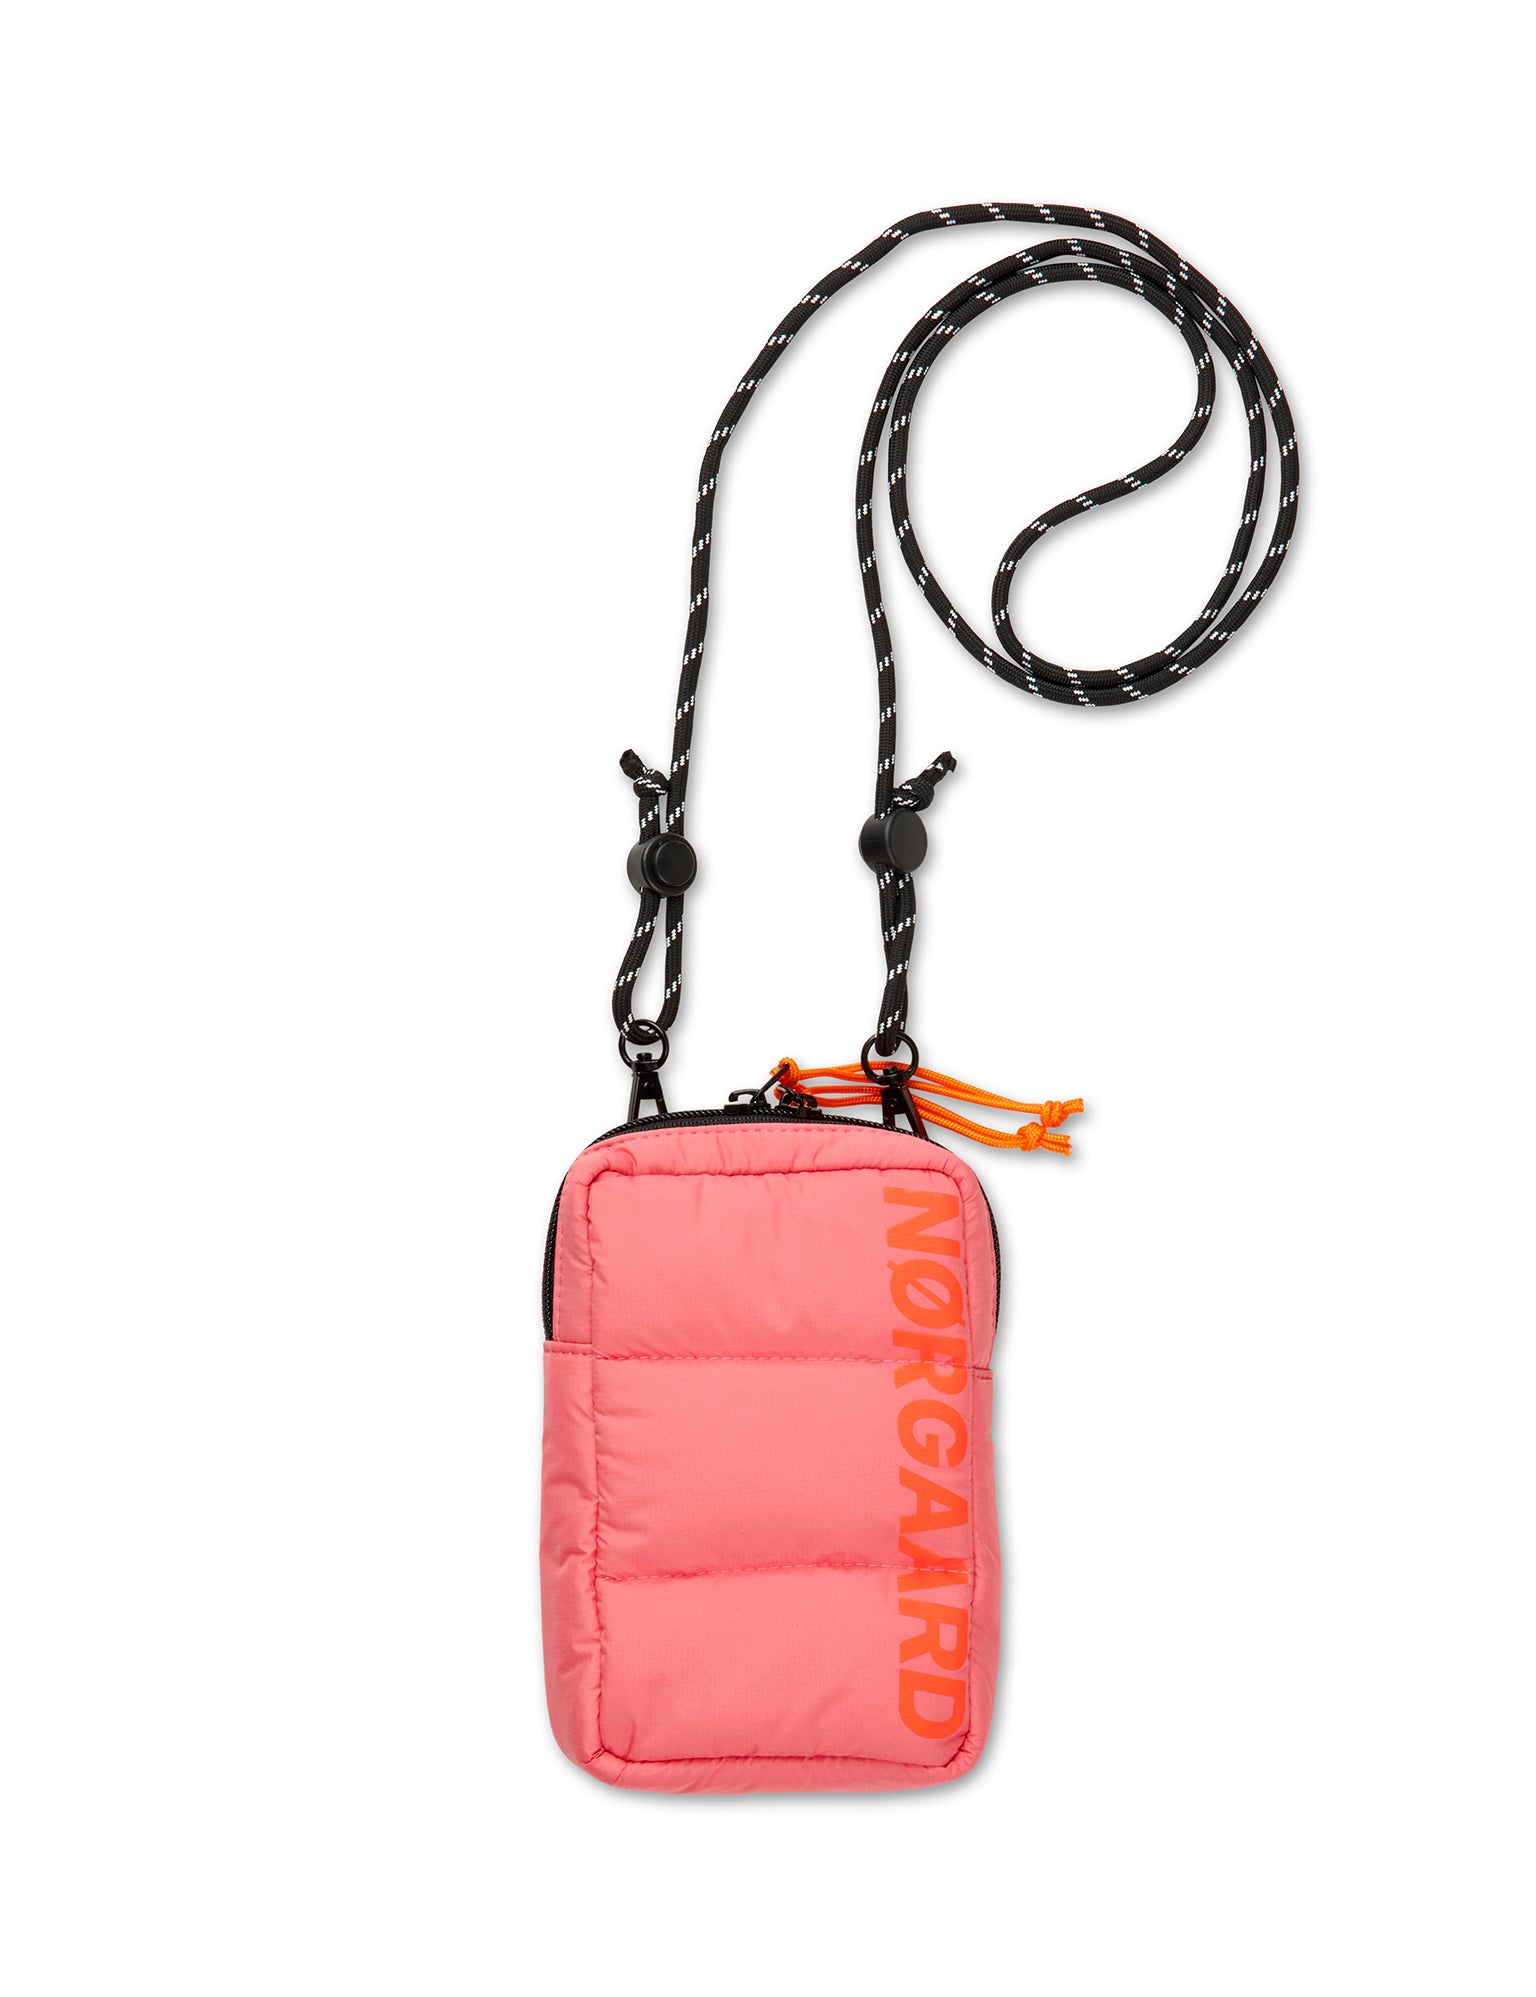 Mads Norgaard Recycle Floss Bag - Shell Pink